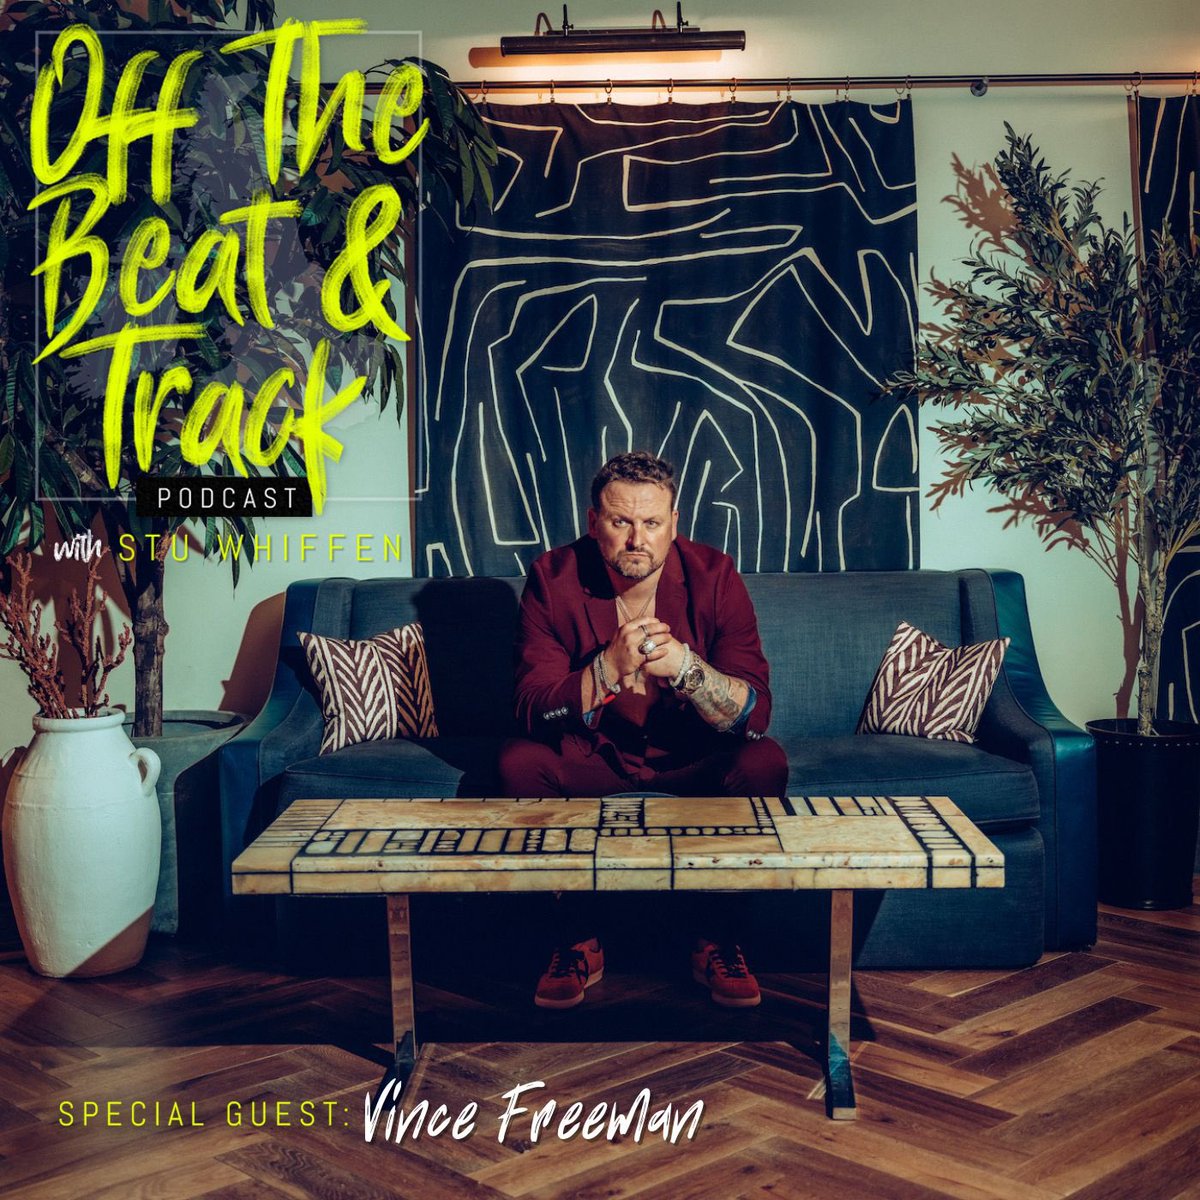 NEW @beatandtrackpod EPISODE!! Host @stuwhiffen has a lovely chat with the wonderful @vincefreeman about some important records in his life and more! Listen here open.spotify.com/episode/0jAeJL…